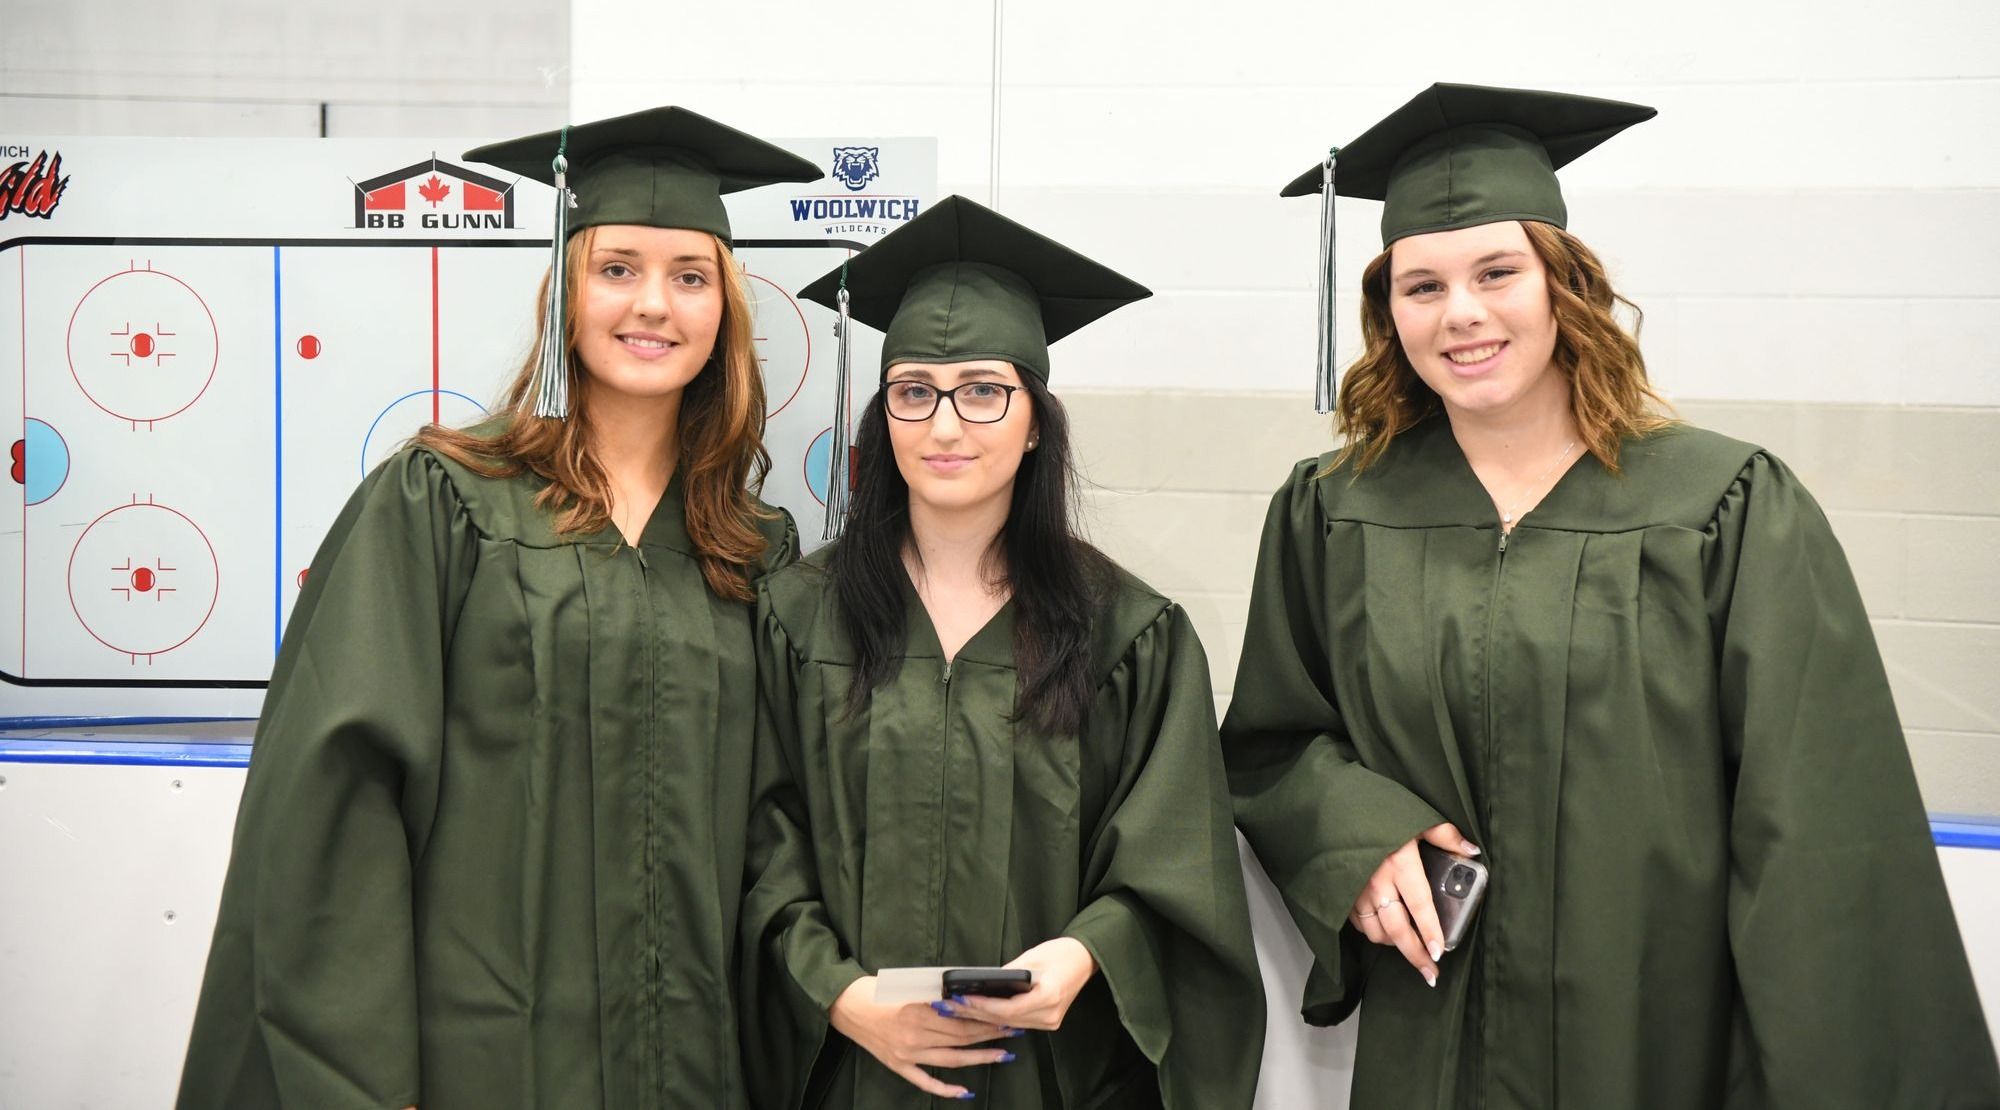 EDSS wraps up school year with commencement ceremony